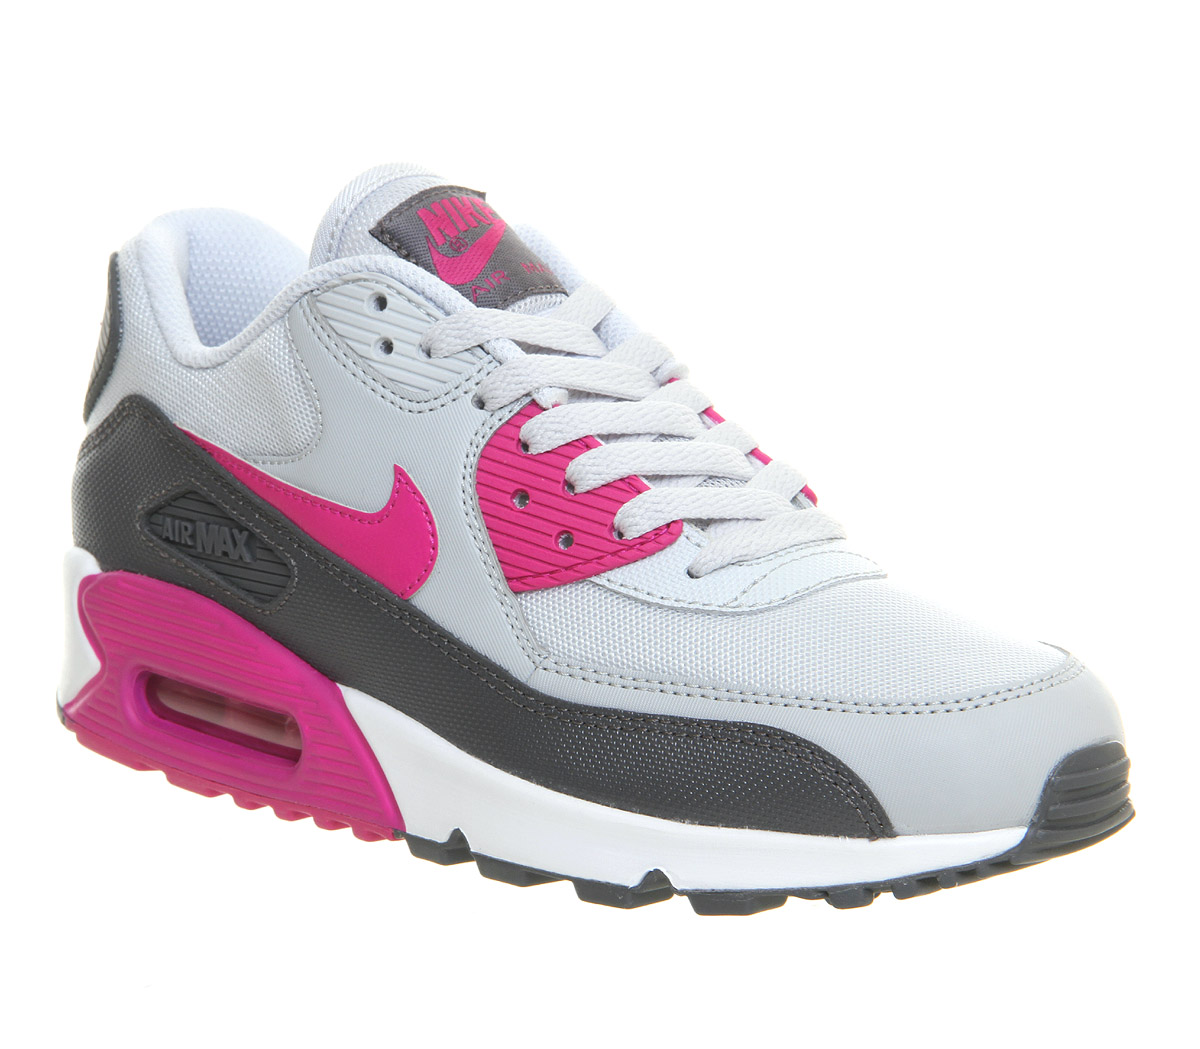 Aankondiging Bedachtzaam Toestand Nike Air Max 90 Pink Grey White - Women's Trainers